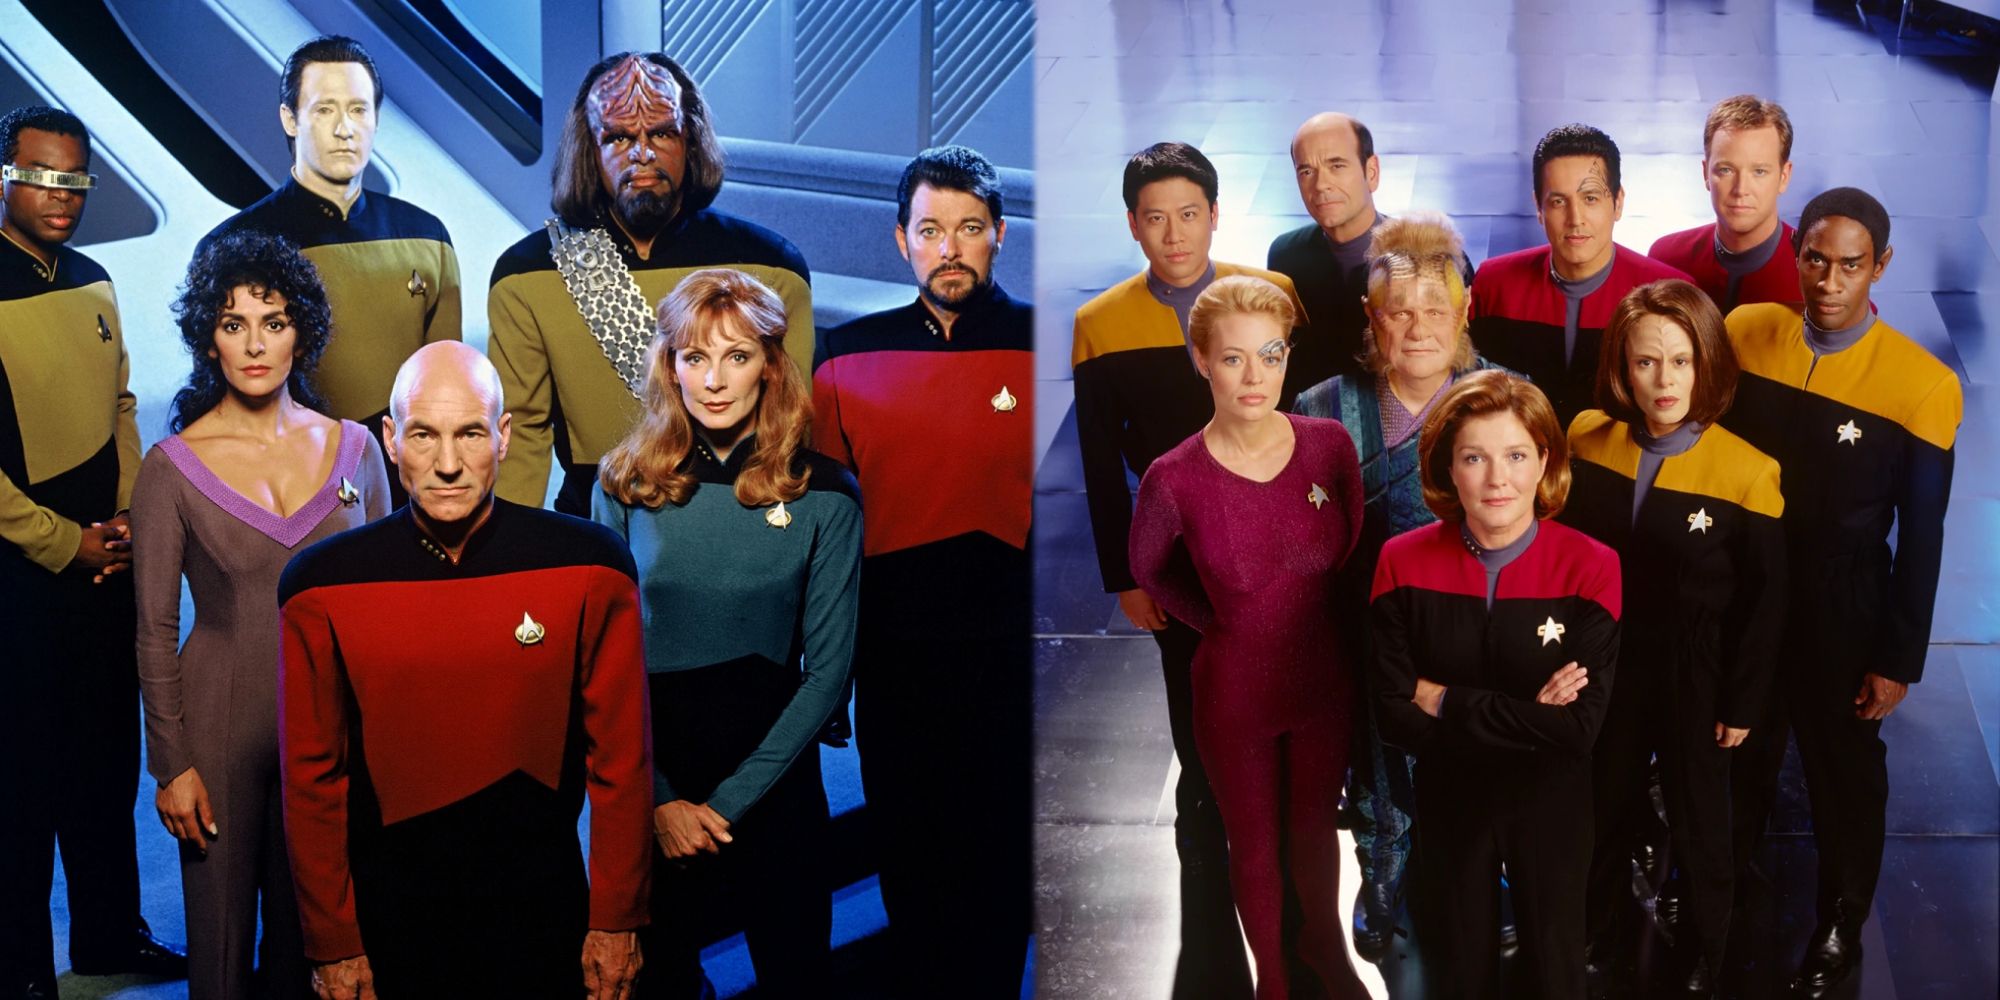 The cast of Star Trek TNG and the cast of Star Trek Voyager